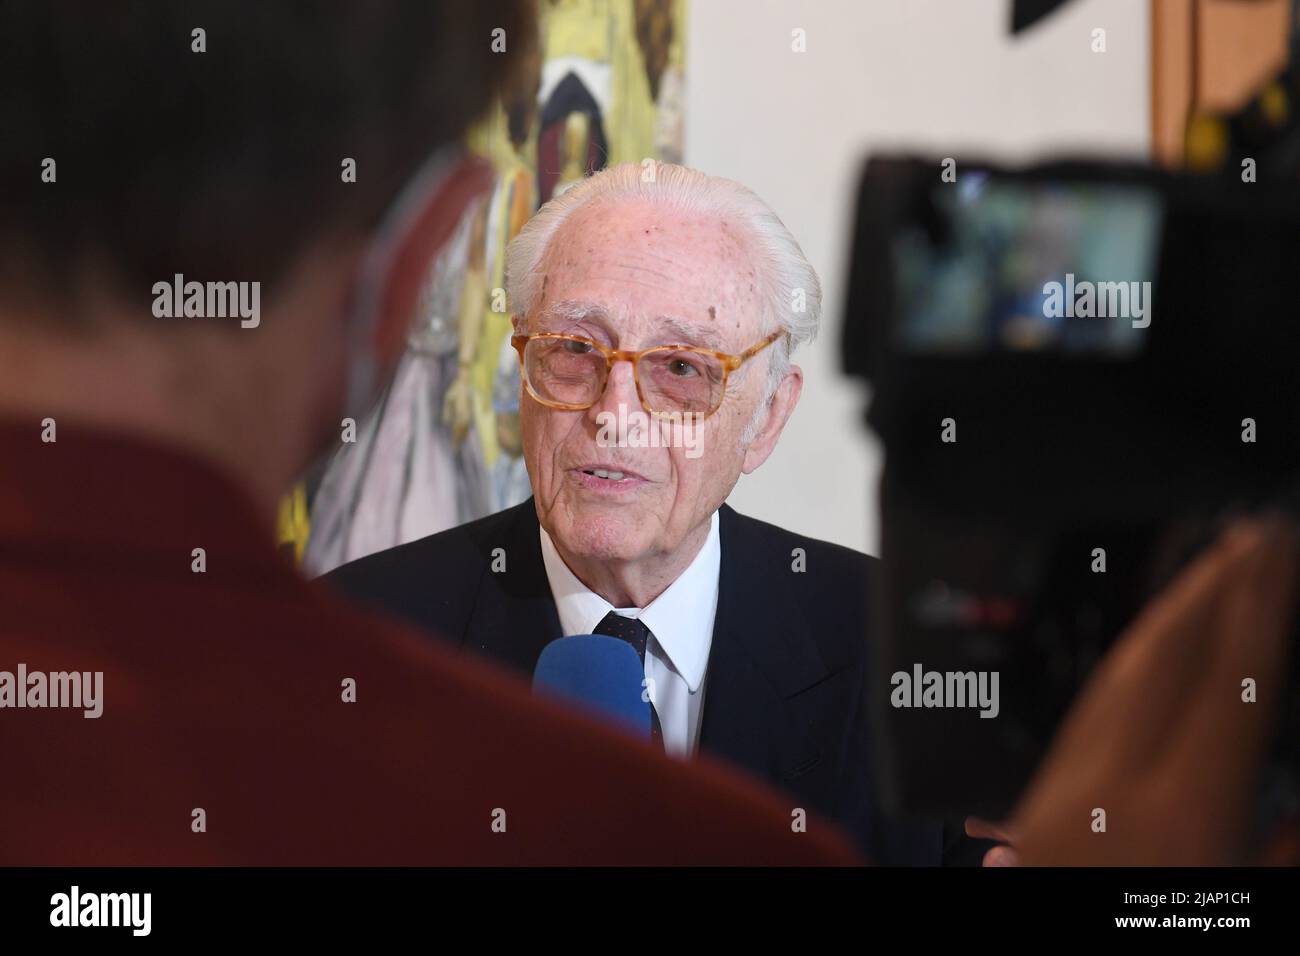 Munich, Germany. 31st May, 2022. Duke Franz of Bavaria gives an interview before the awarding of the Romano Guardini Prize. The 88-year-old head of the House of Wittelsbach, Duke Franz of Bavaria, receives the 10,000-euro award for his lifelong commitment to areas of culture and science at the Catholic Academy of Bavaria. Credit: Felix Hörhager/dpa/Alamy Live News Stock Photo